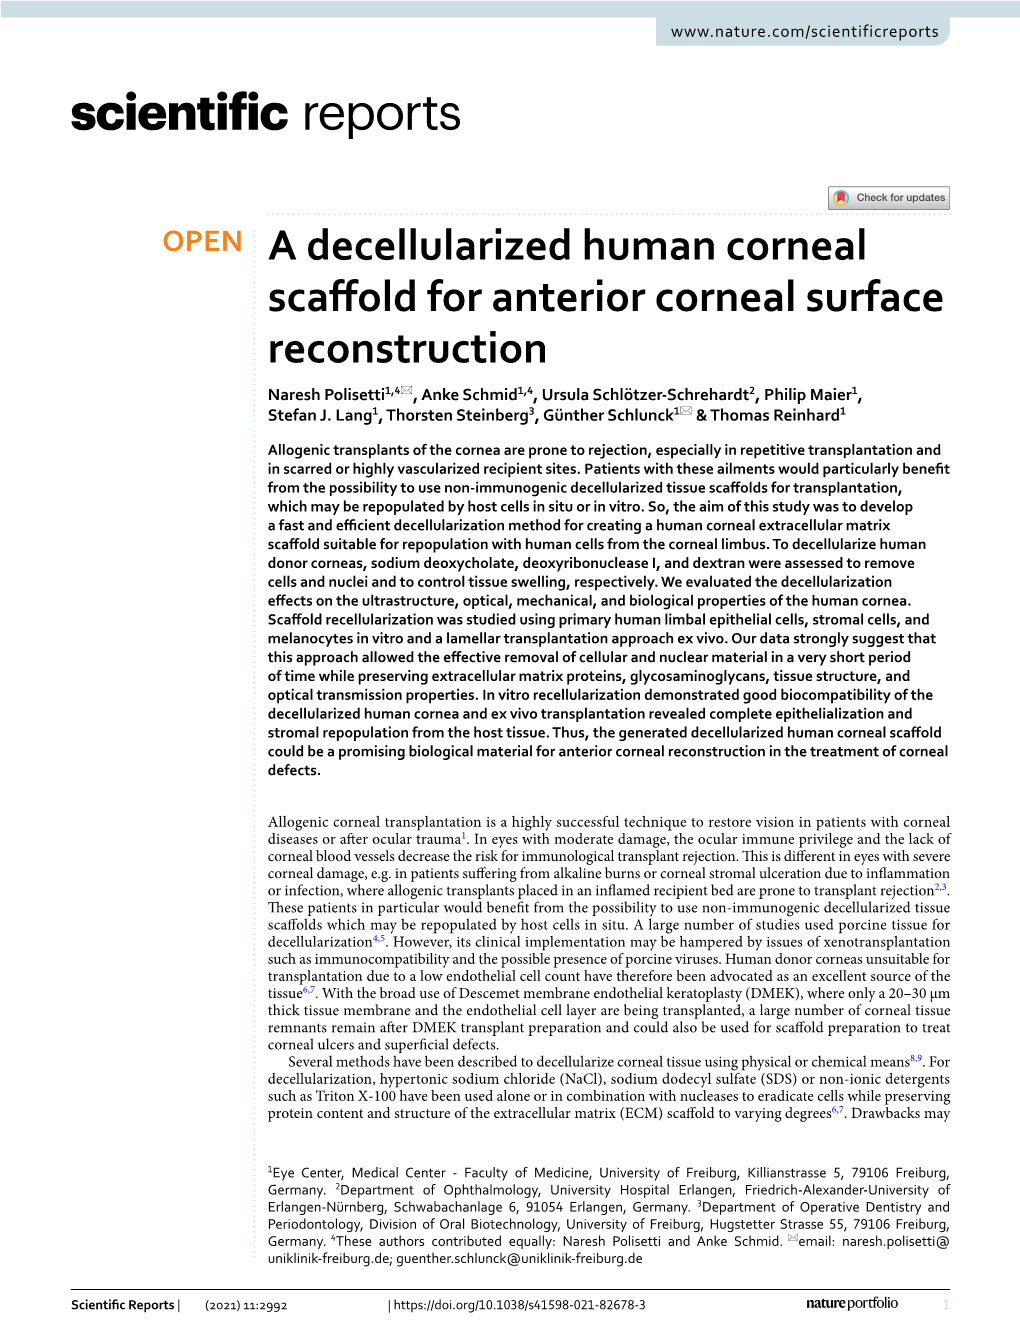 A Decellularized Human Corneal Scaffold for Anterior Corneal Surface Reconstruction